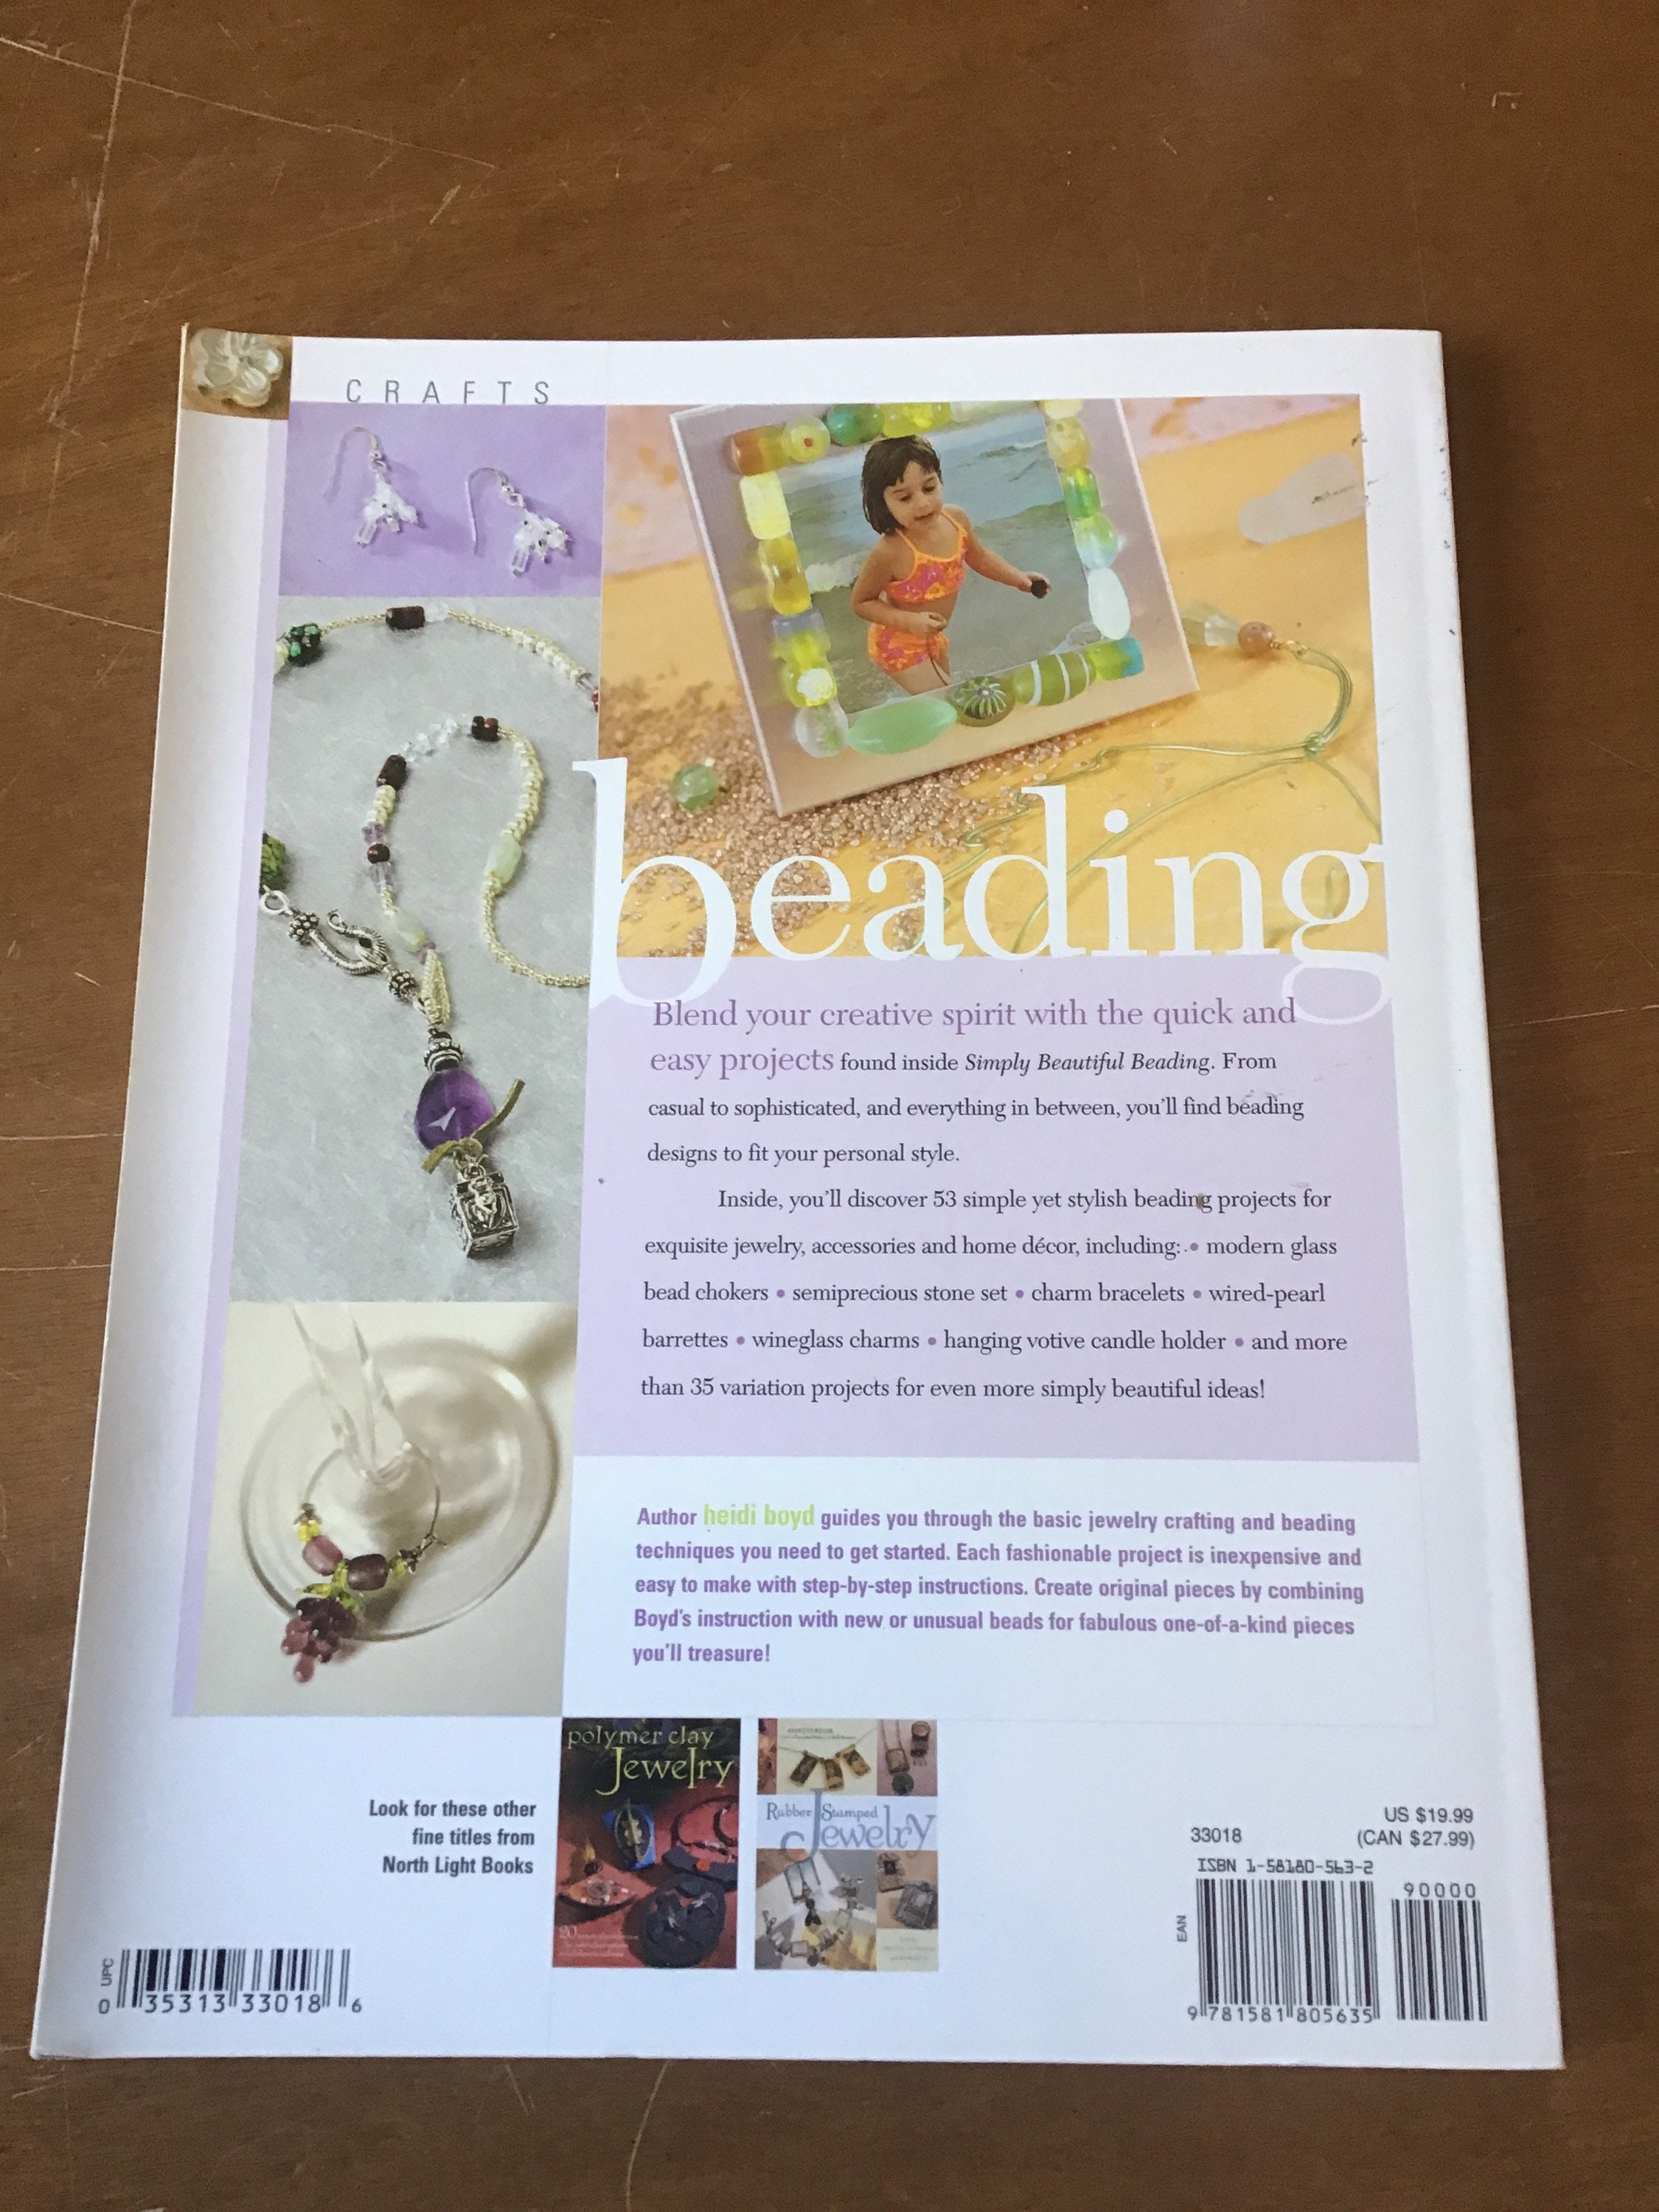 The Beader's Guide to Jewelry Design Paperback Book, Bead Book